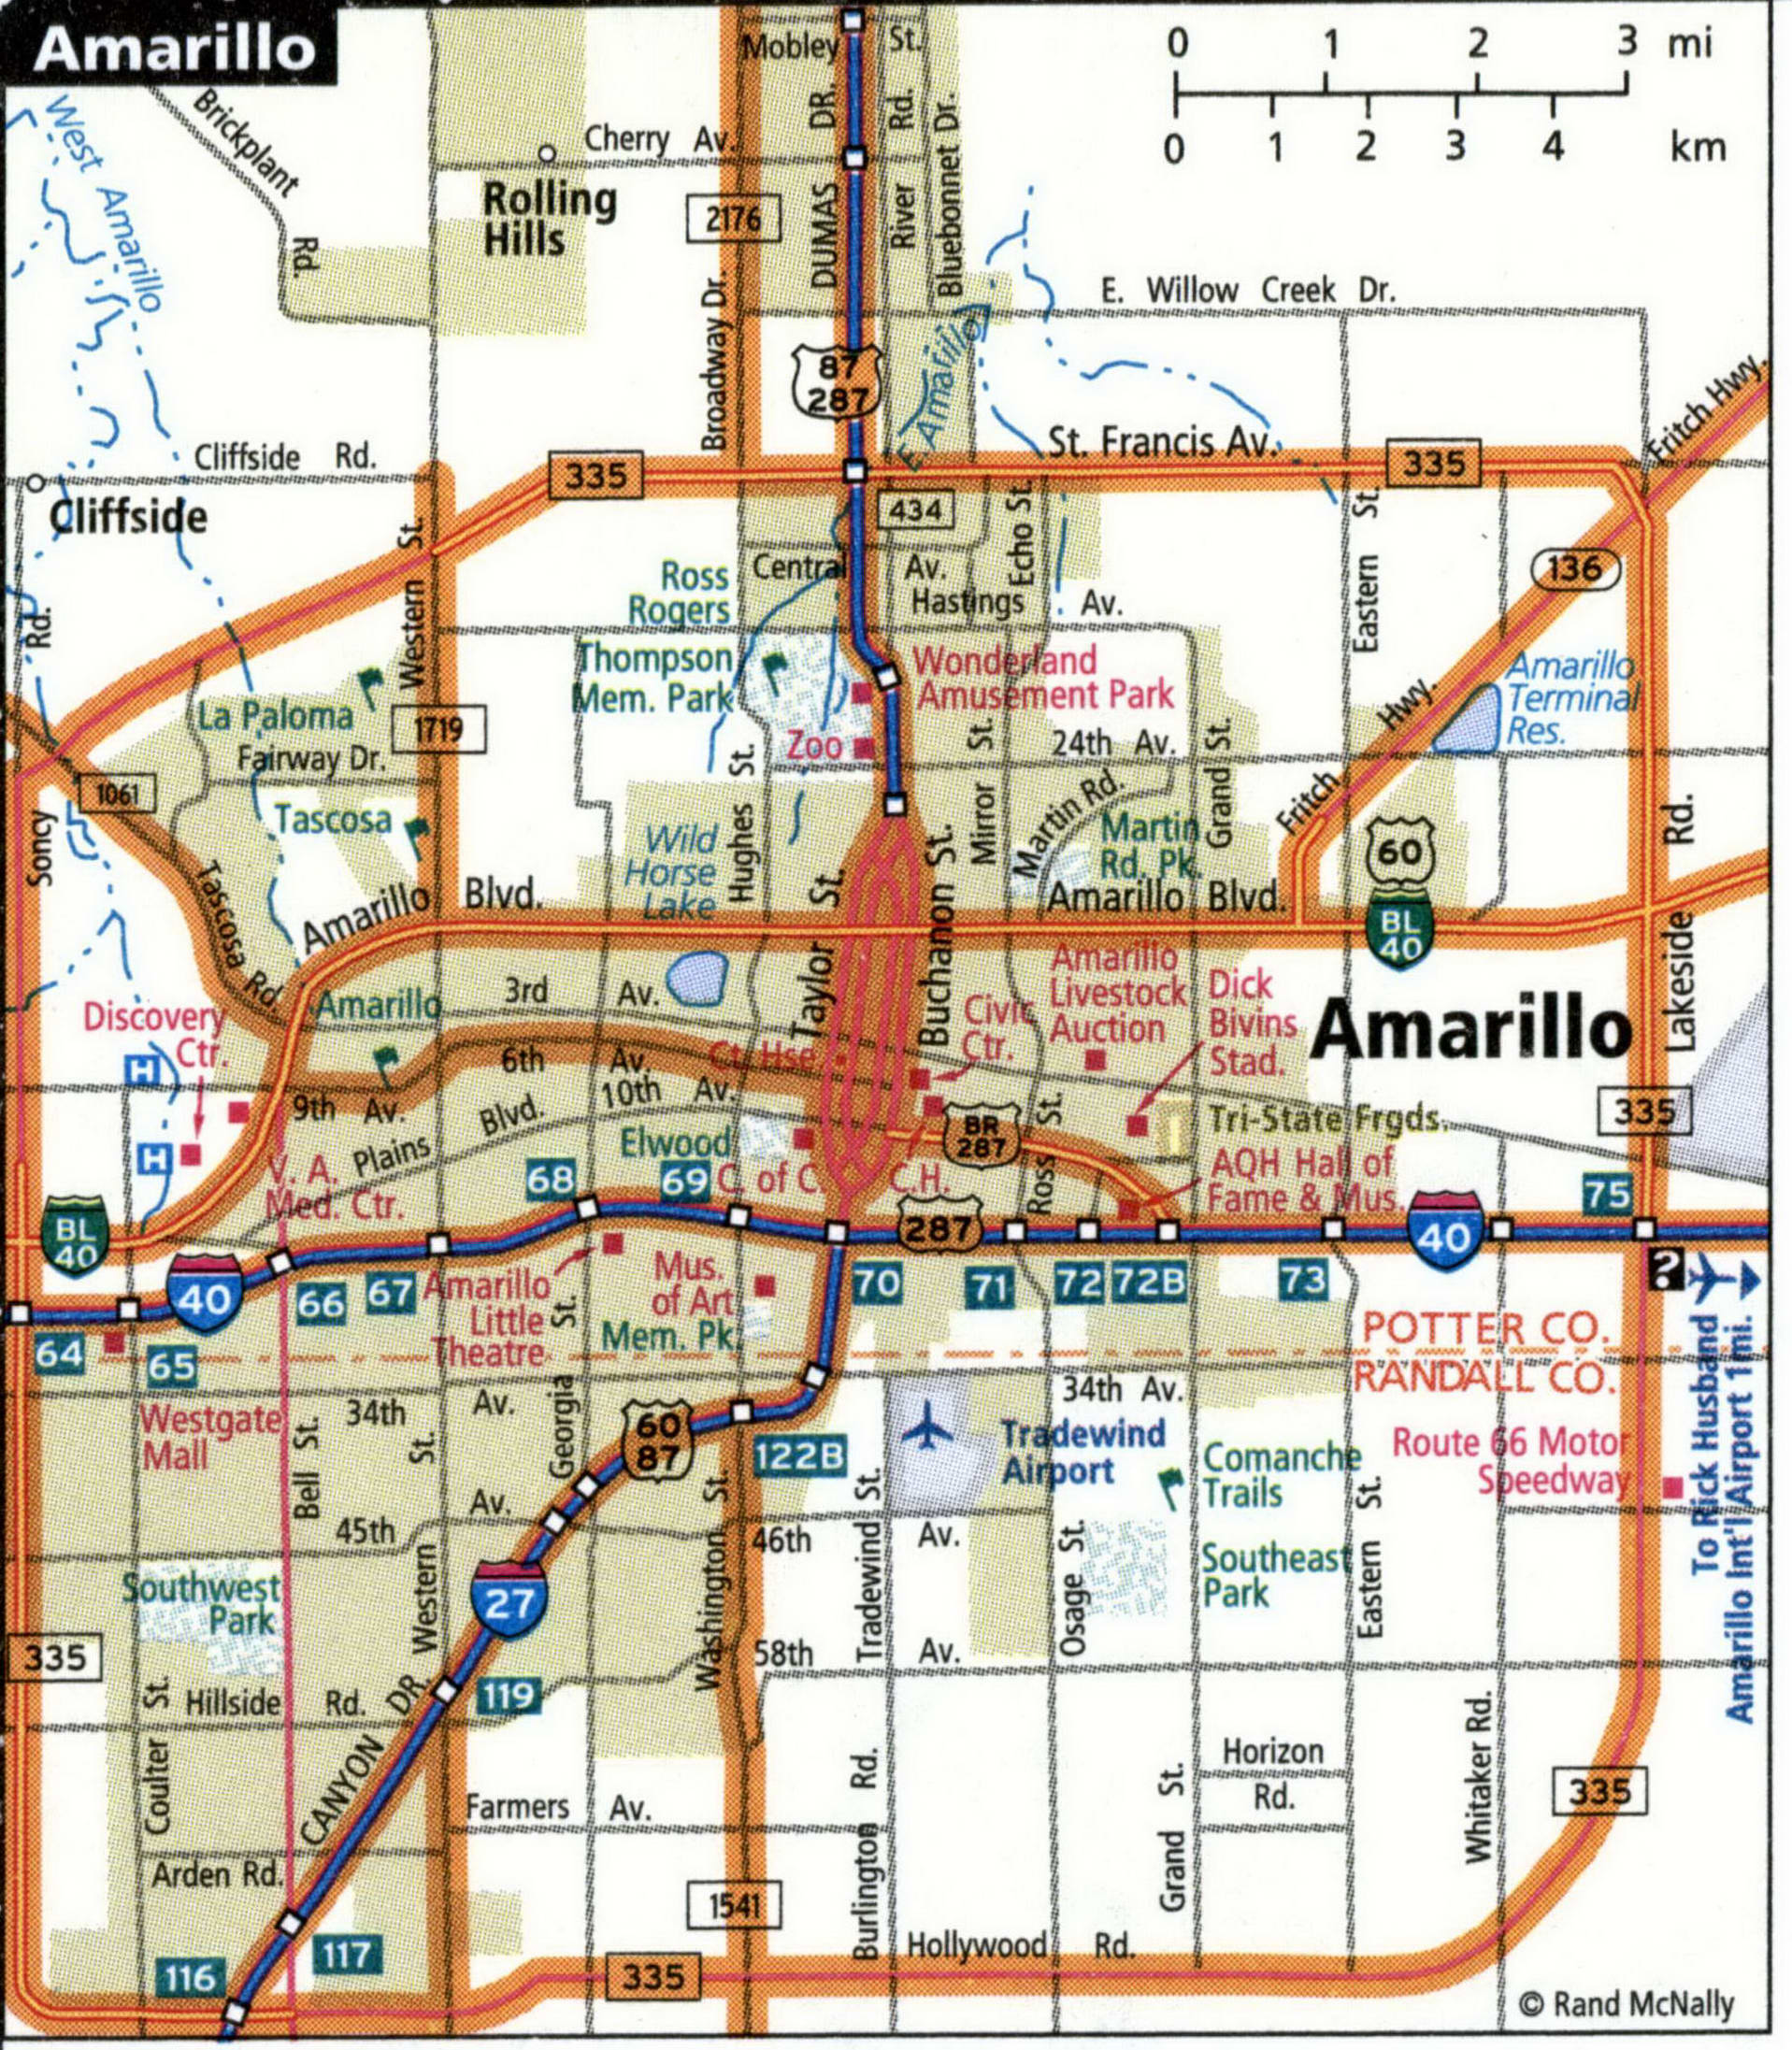 Amarillo city map for truckers